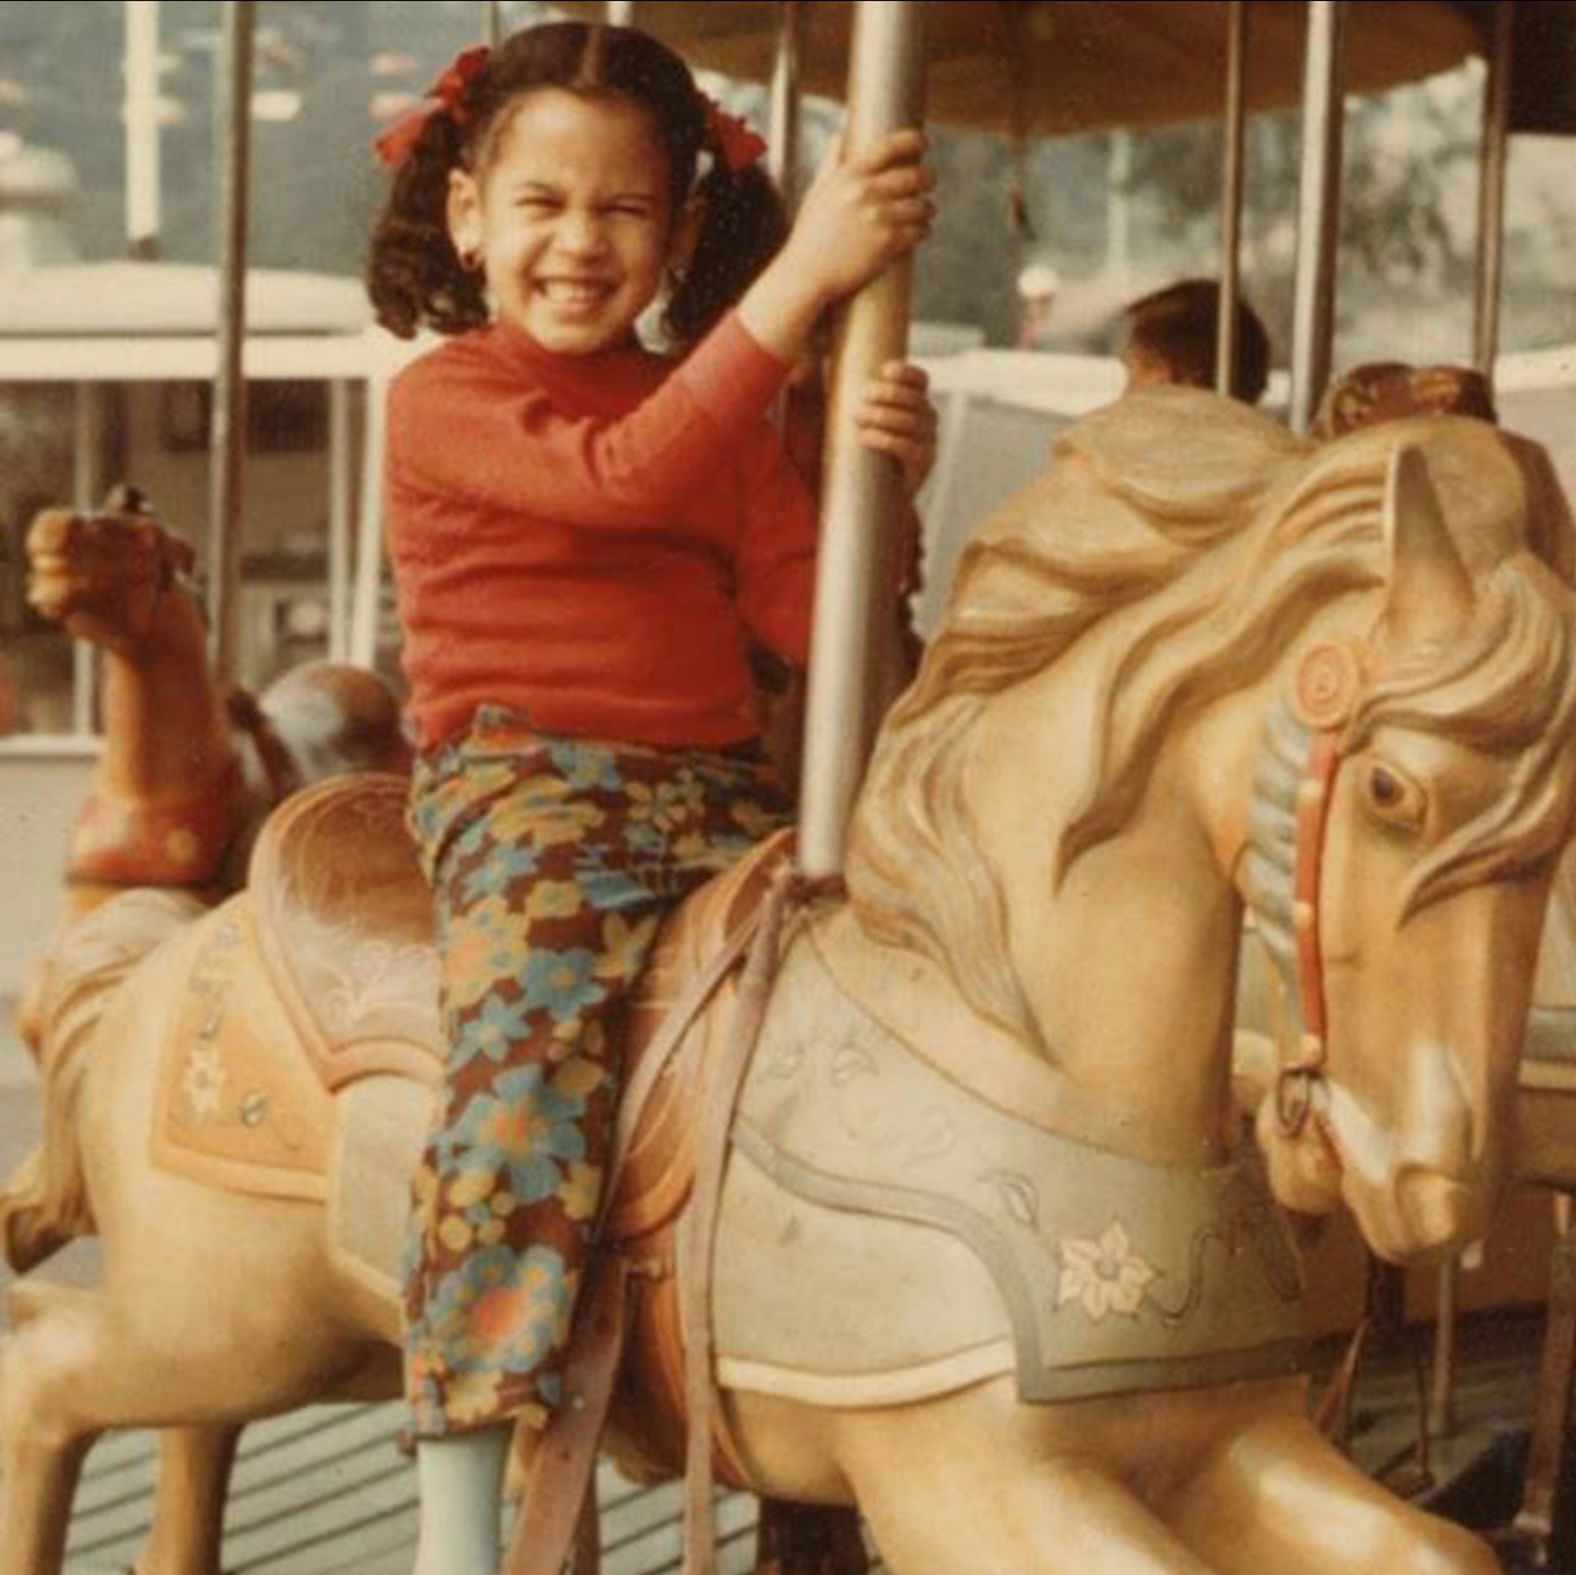 Harris rides a carousel in this old photo <a href="index.php?page=&url=https%3A%2F%2Fwww.instagram.com%2Fp%2F3g64_Qrv3_%2F" target="_blank" target="_blank">she posted to social media in 2015.</a> Her name, Kamala, comes from the Sanskrit word for the lotus flower. Harris is the daughter of Jamaican and Indian immigrants and grew up attending both a Baptist church and a Hindu temple.